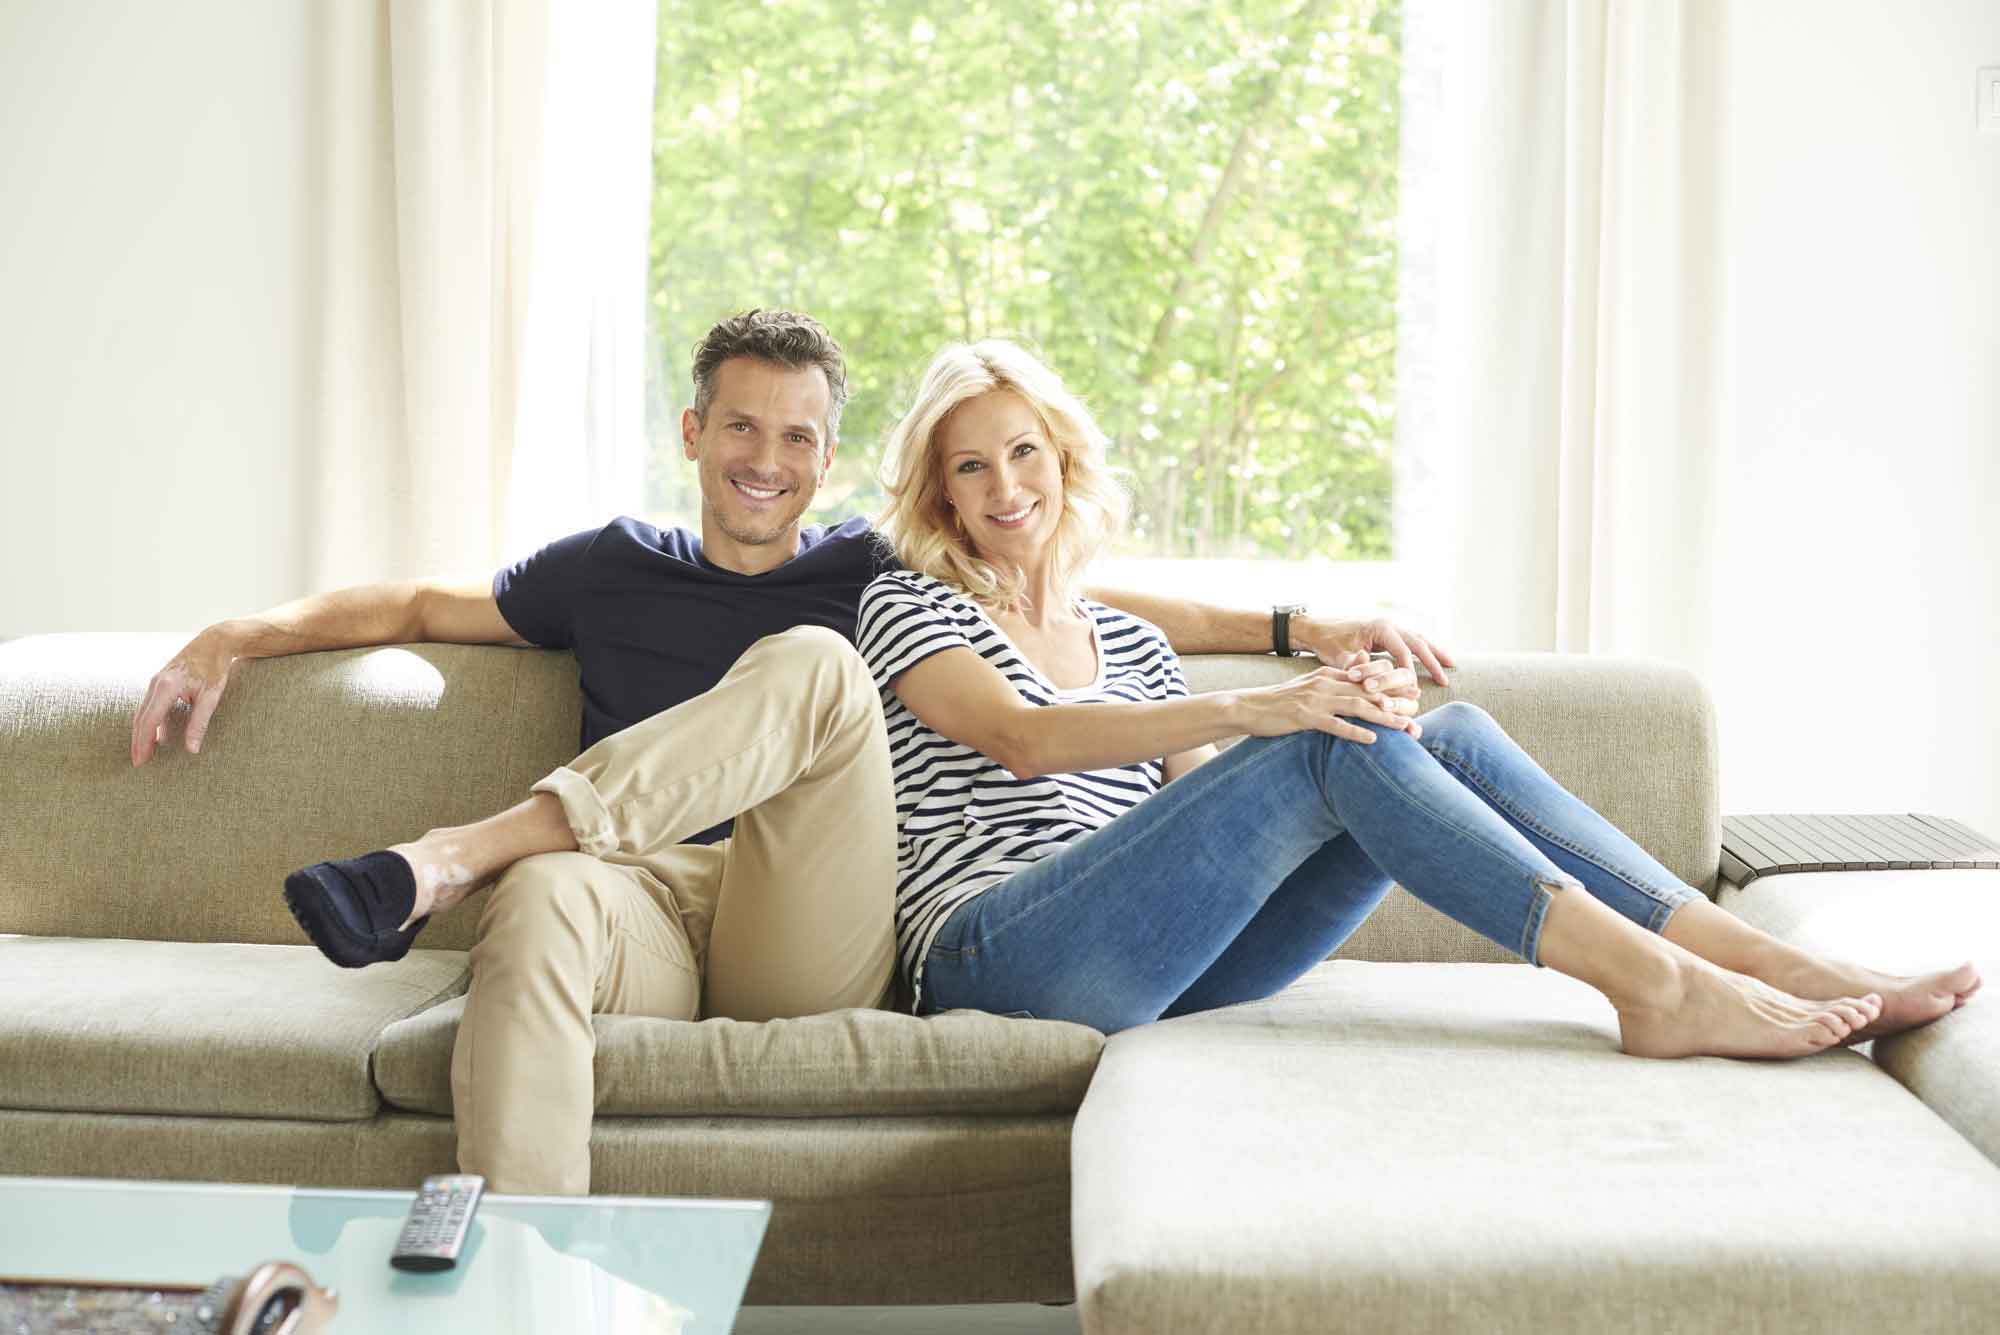 Is A Reclining Sofa Right For Me? 